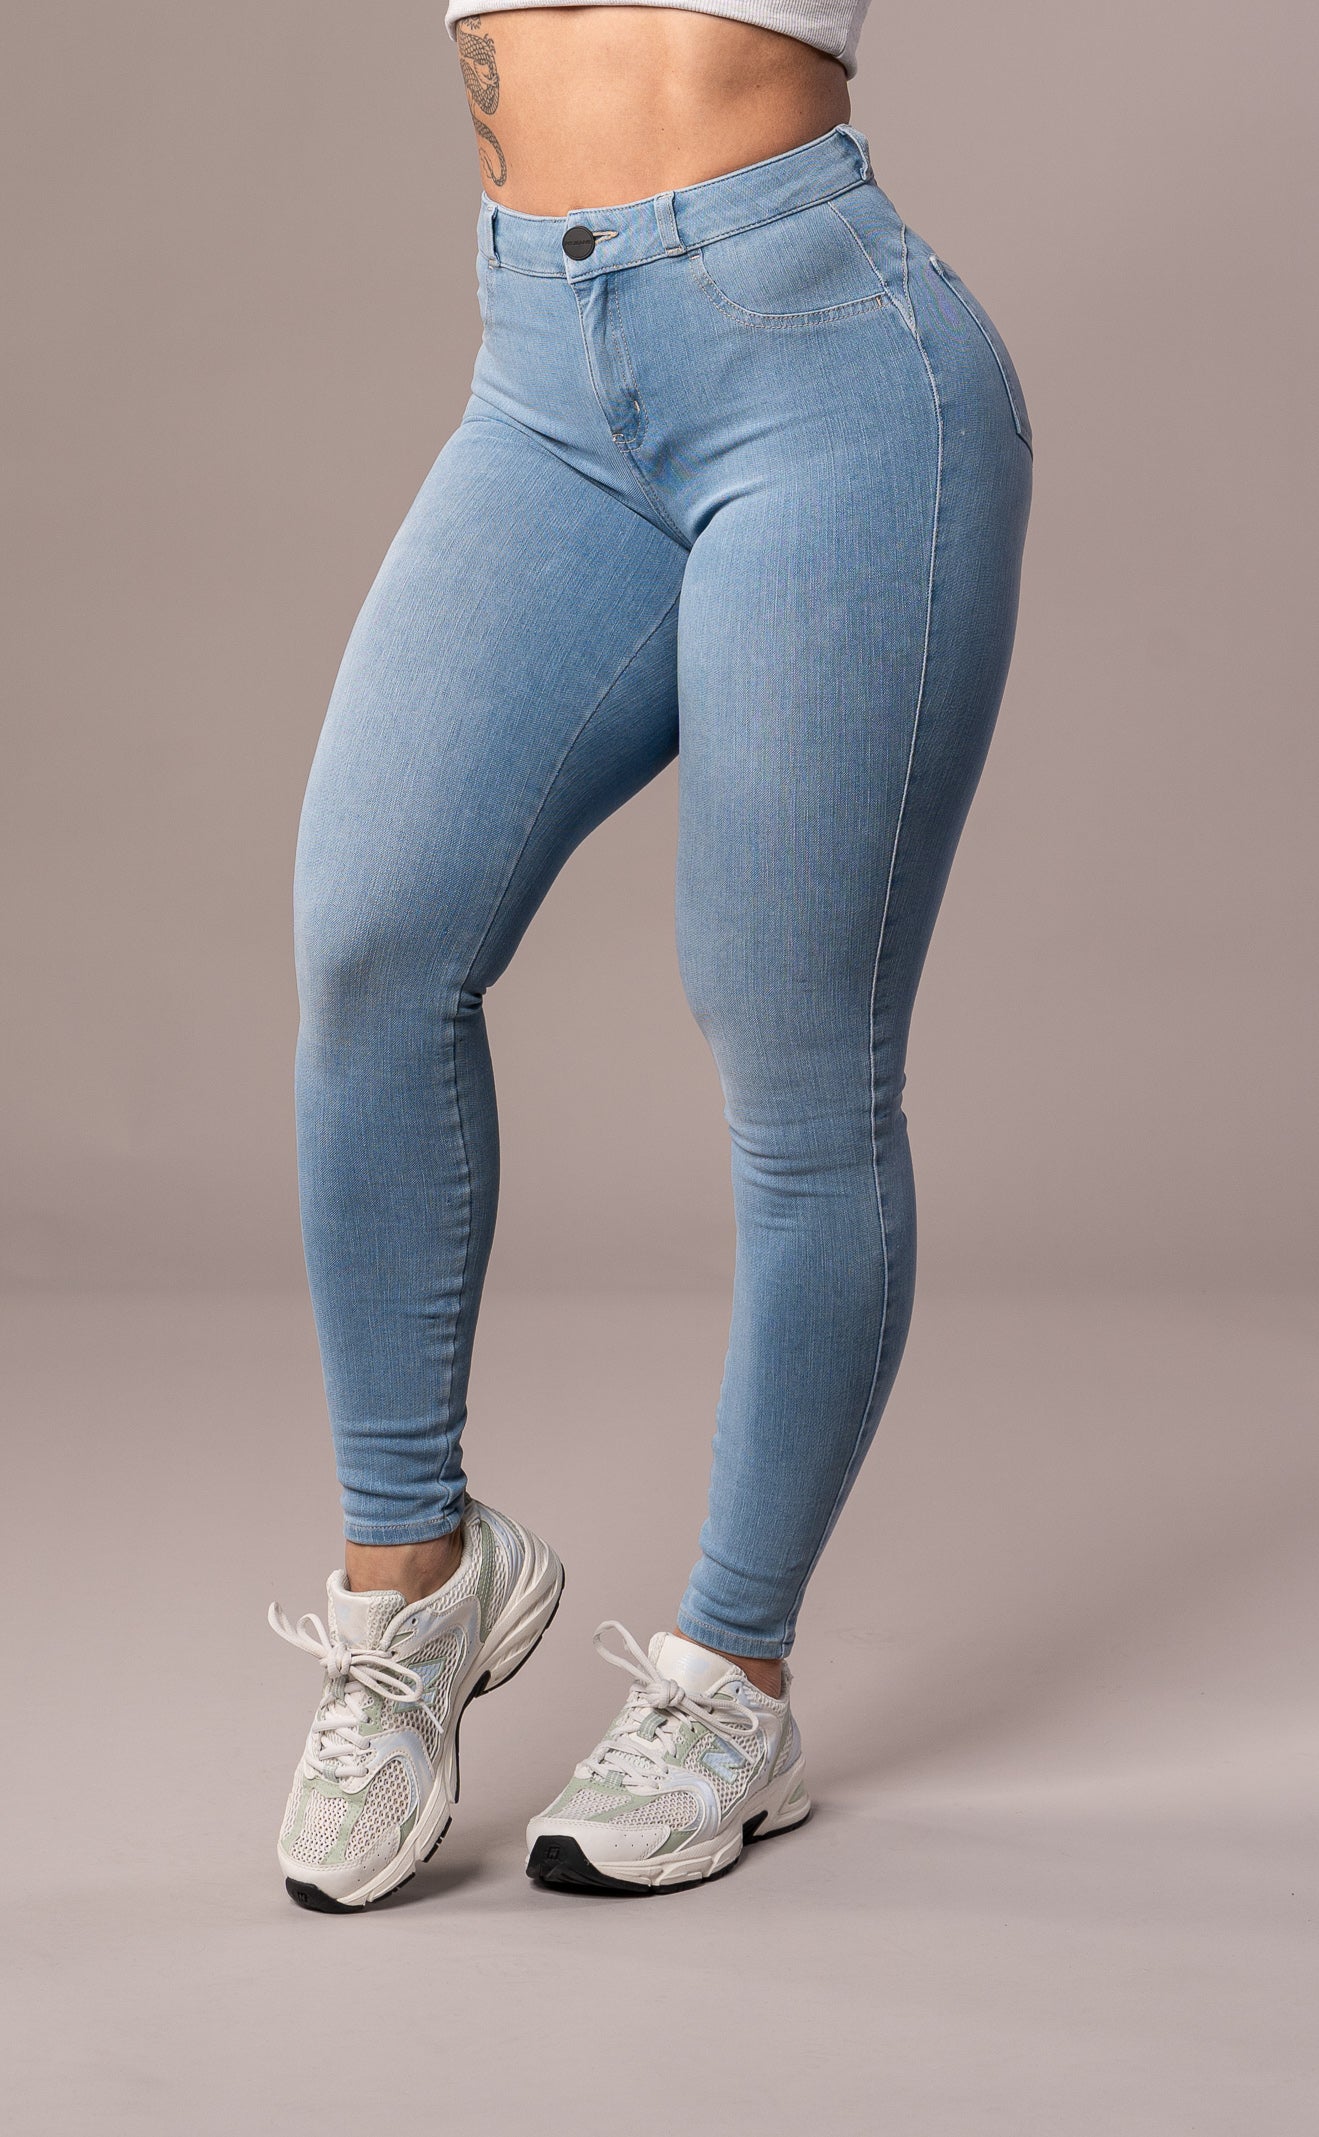 Womens 360 V2 Mid Waisted Fitjeans - Arctic Light Blue 360 V2 Mid Waisted FITJEANS   